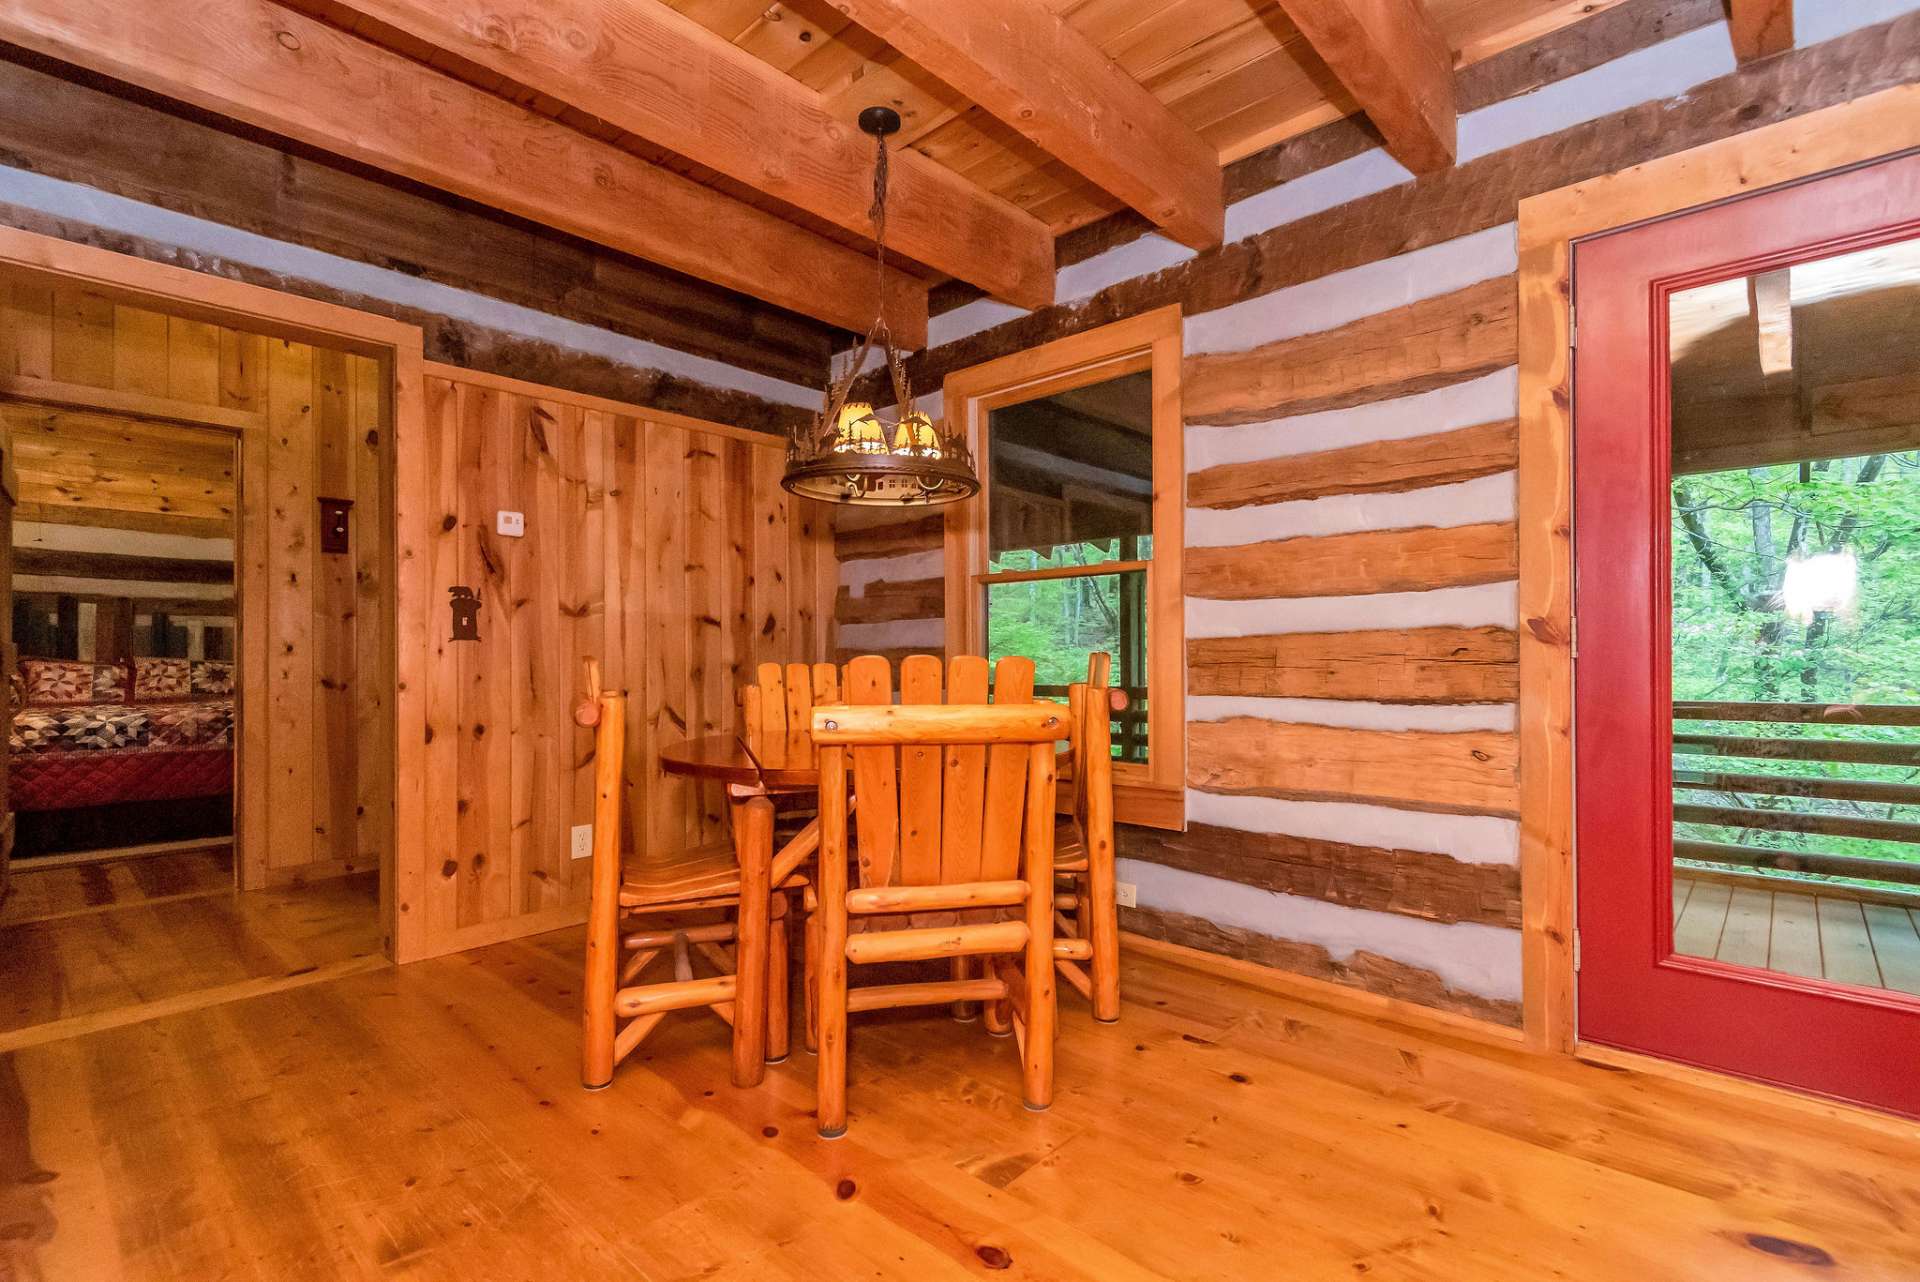 This cozy dining area will create memories of breaking bread with loved ones at the cabin.